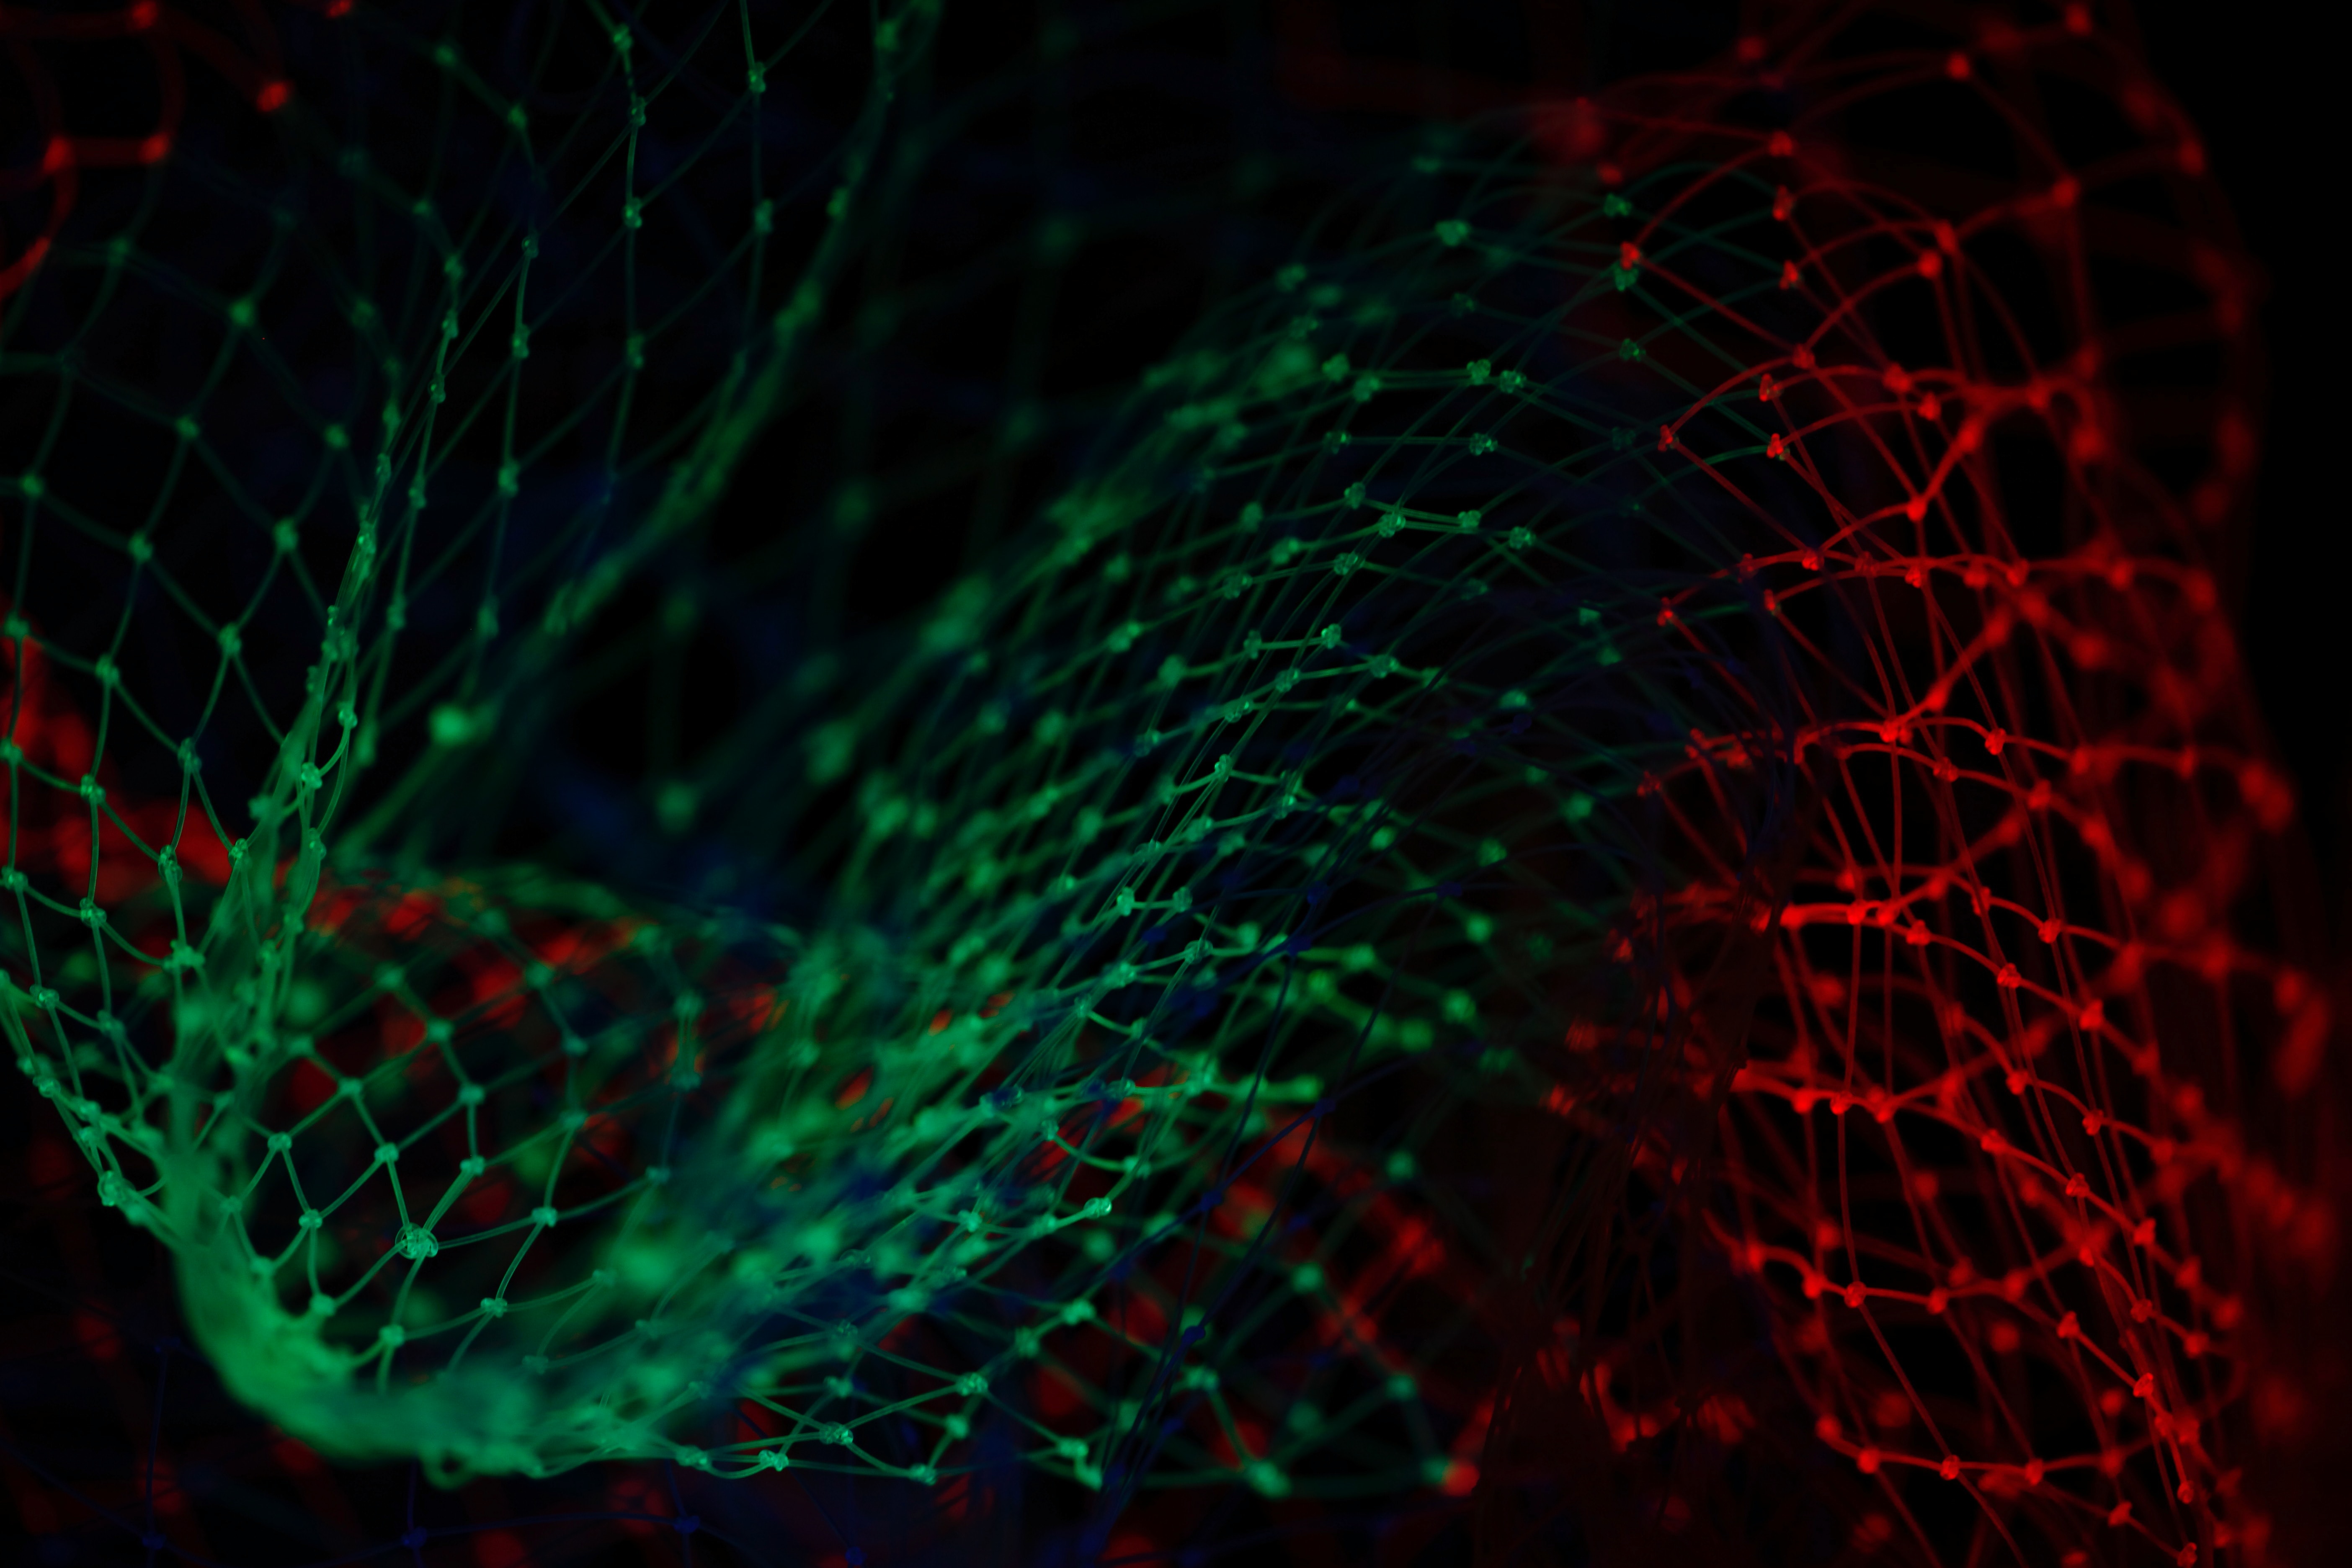 networks represented by green and red lines and dots on a black background